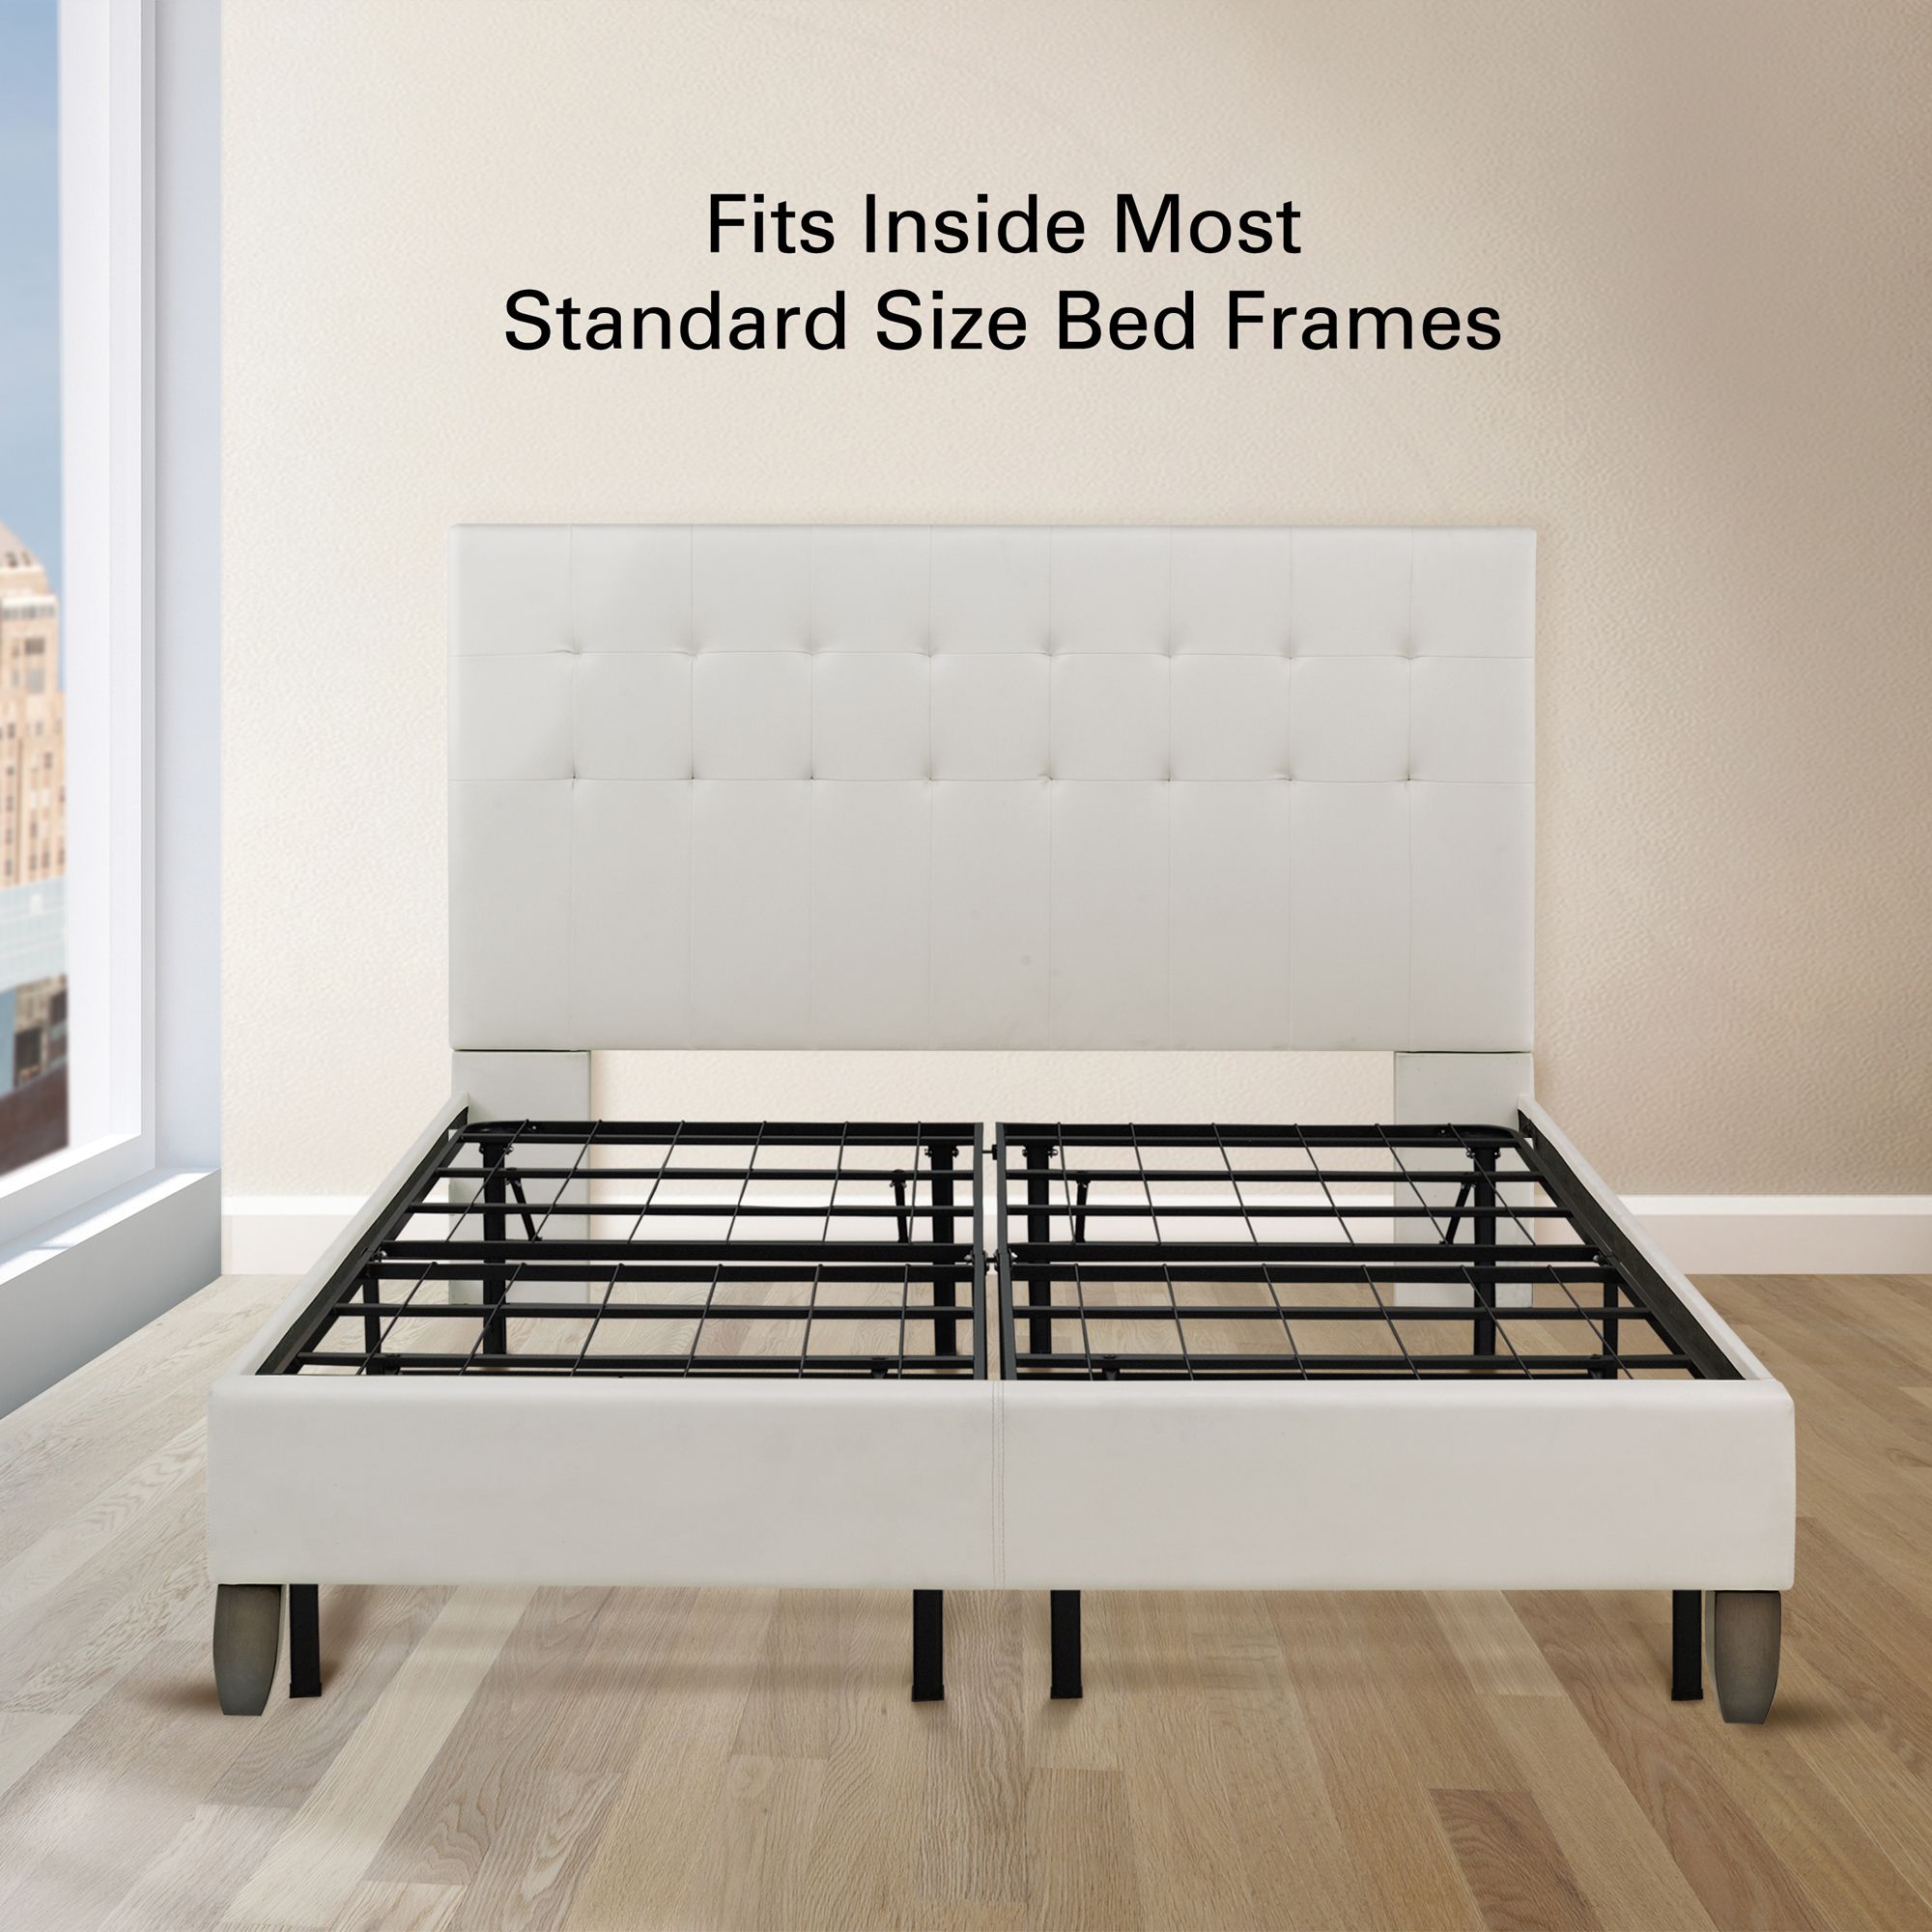 14 Contour Rest Dream Support California King Size Bed Frame Bjs Wholesale Club